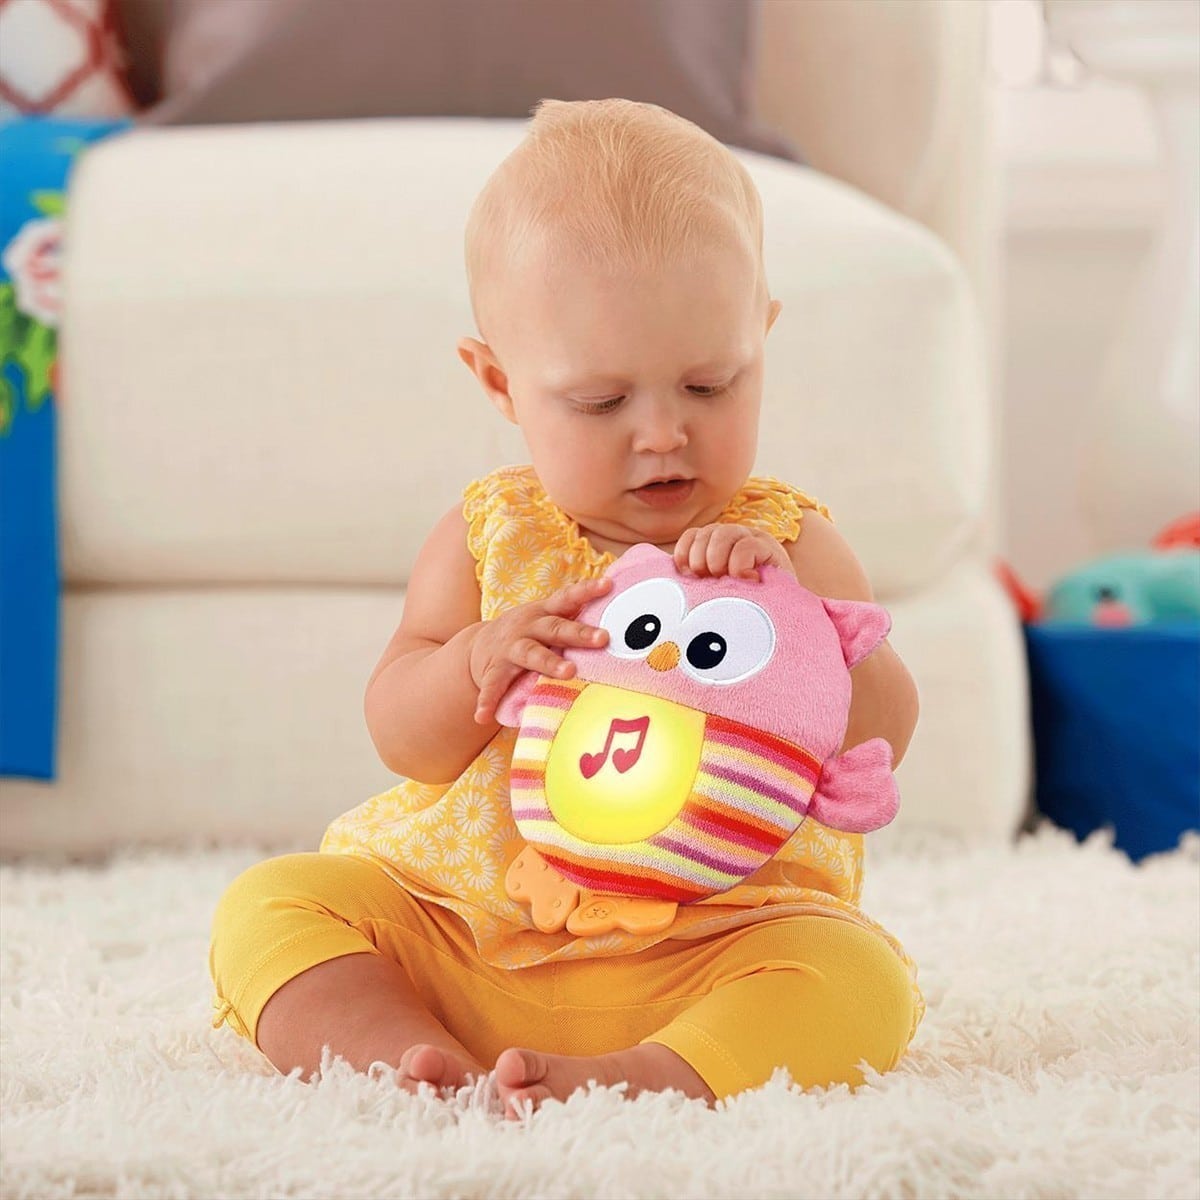 Fisher Price - Soothe and Glow Owl - Pink